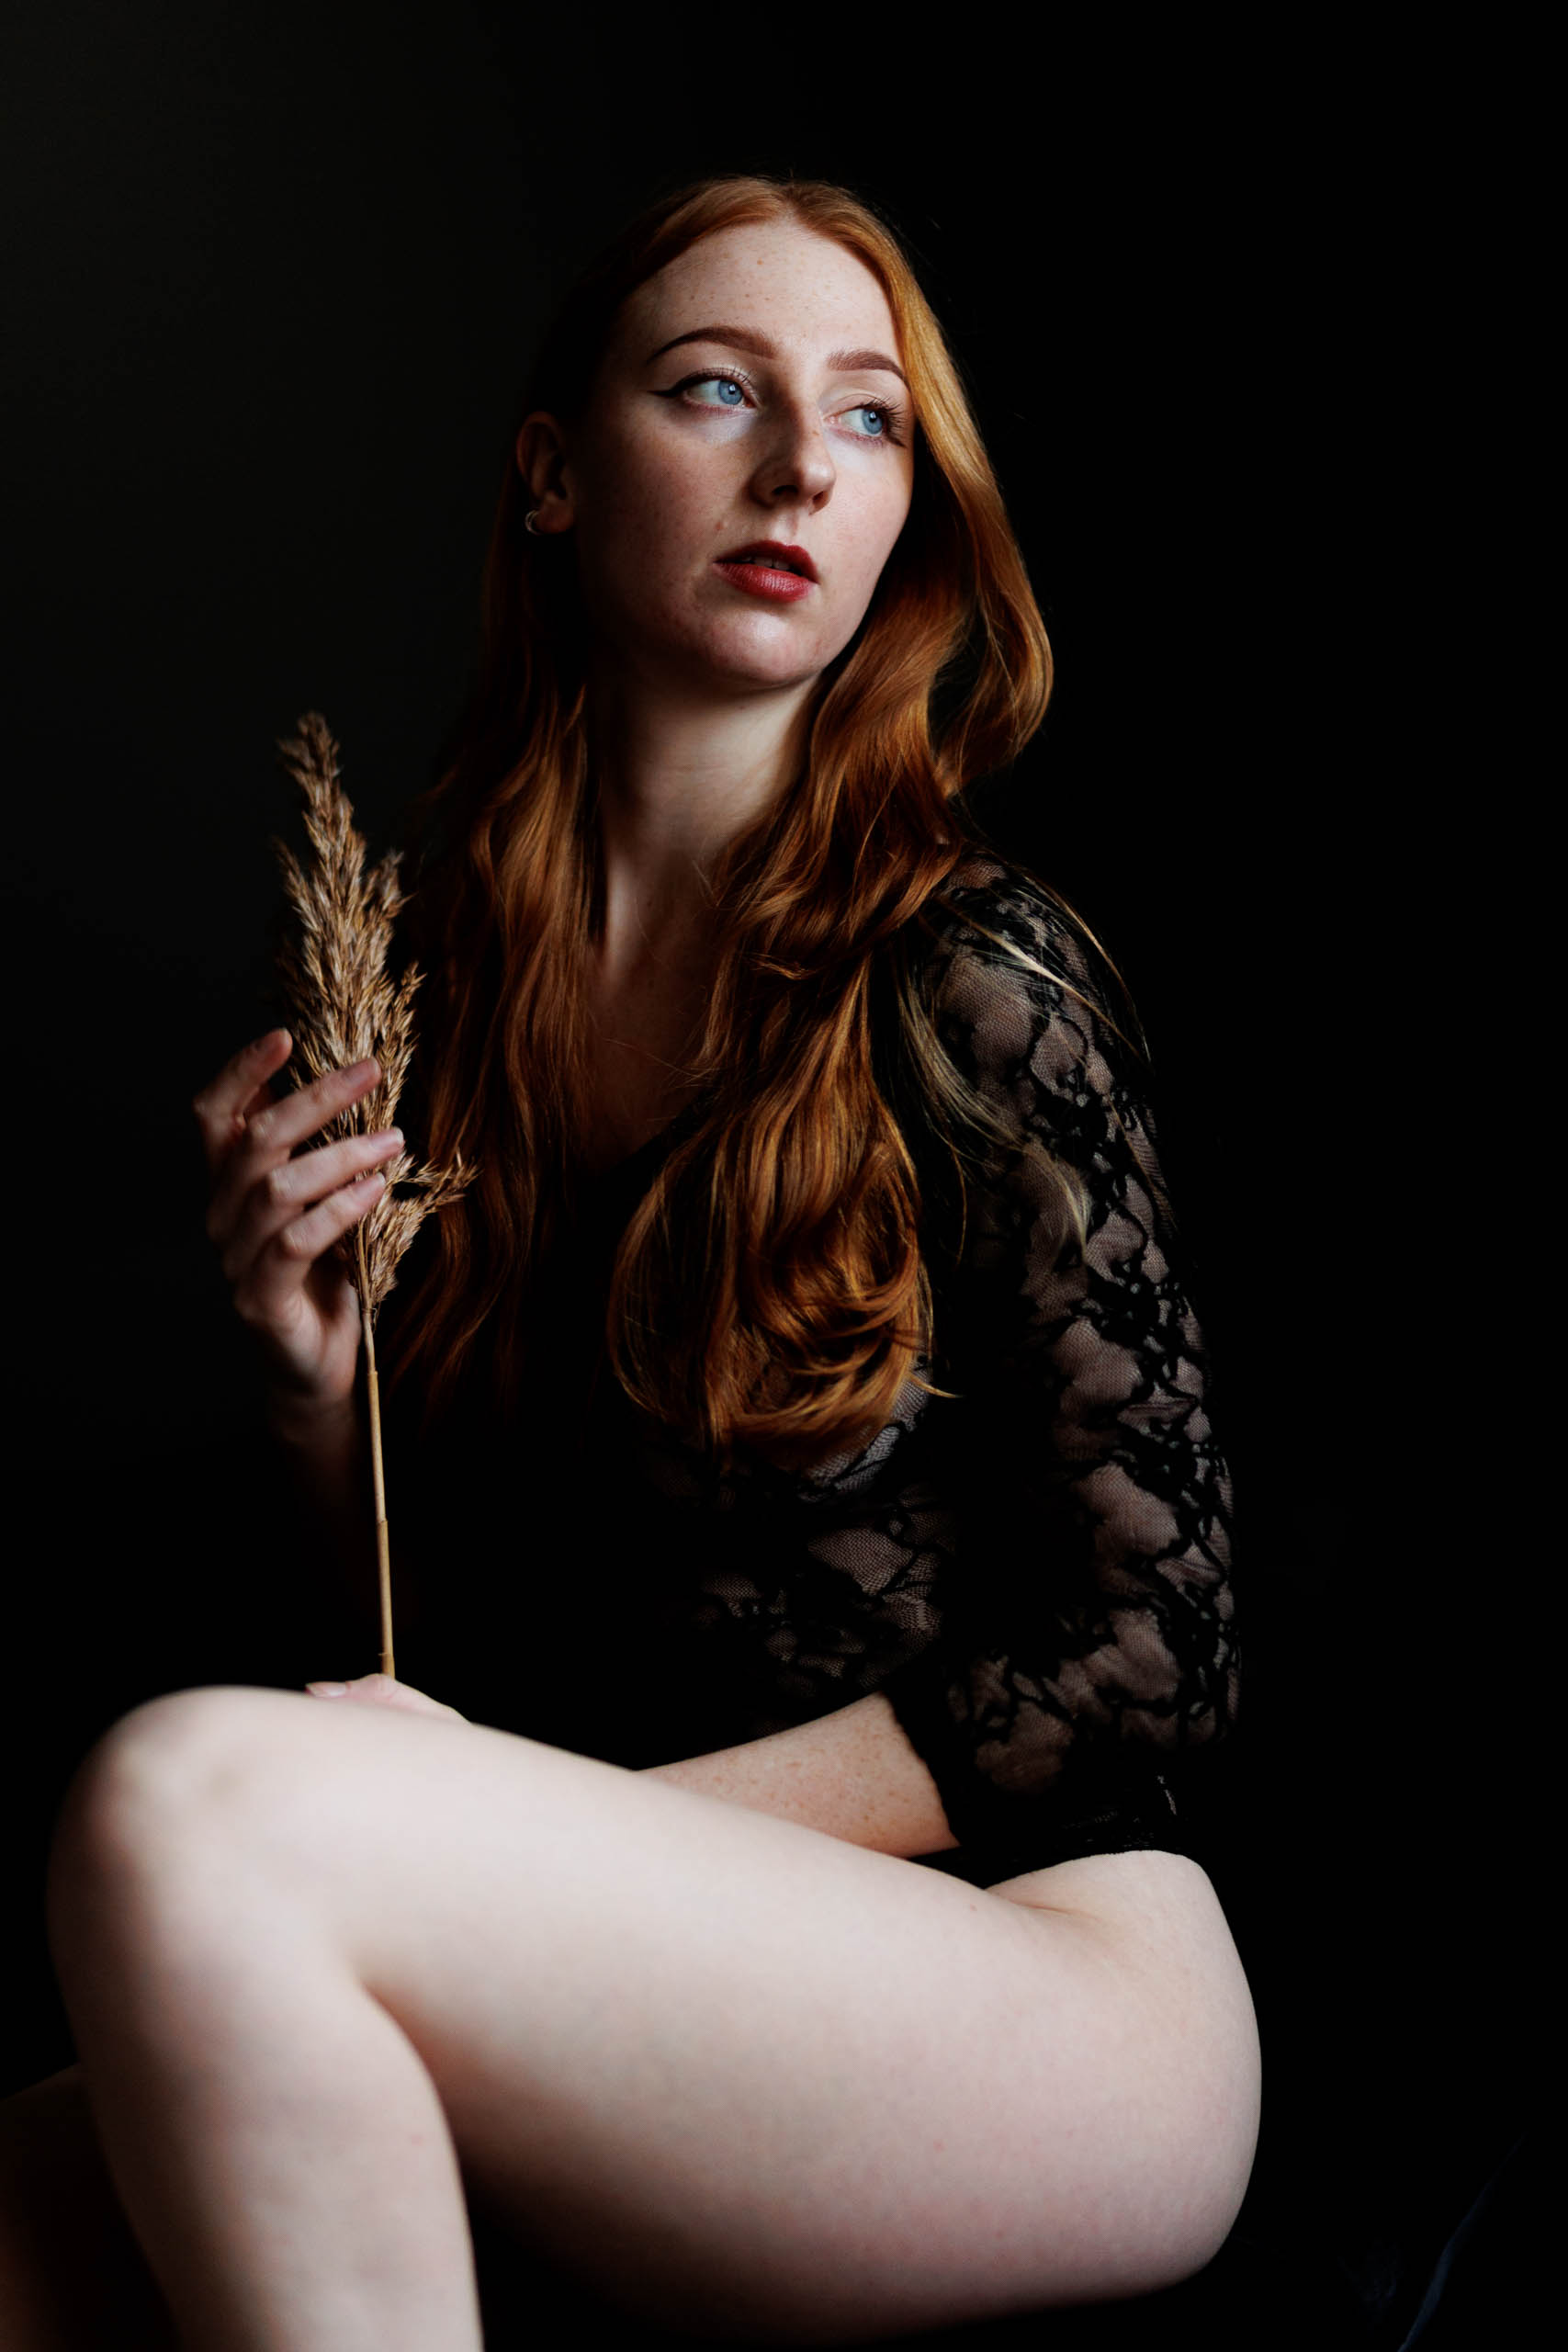 A woman with red hair sitting on a chair during a boudoir photo shoot in Rotterdam, elegantly holding a blade of grass.